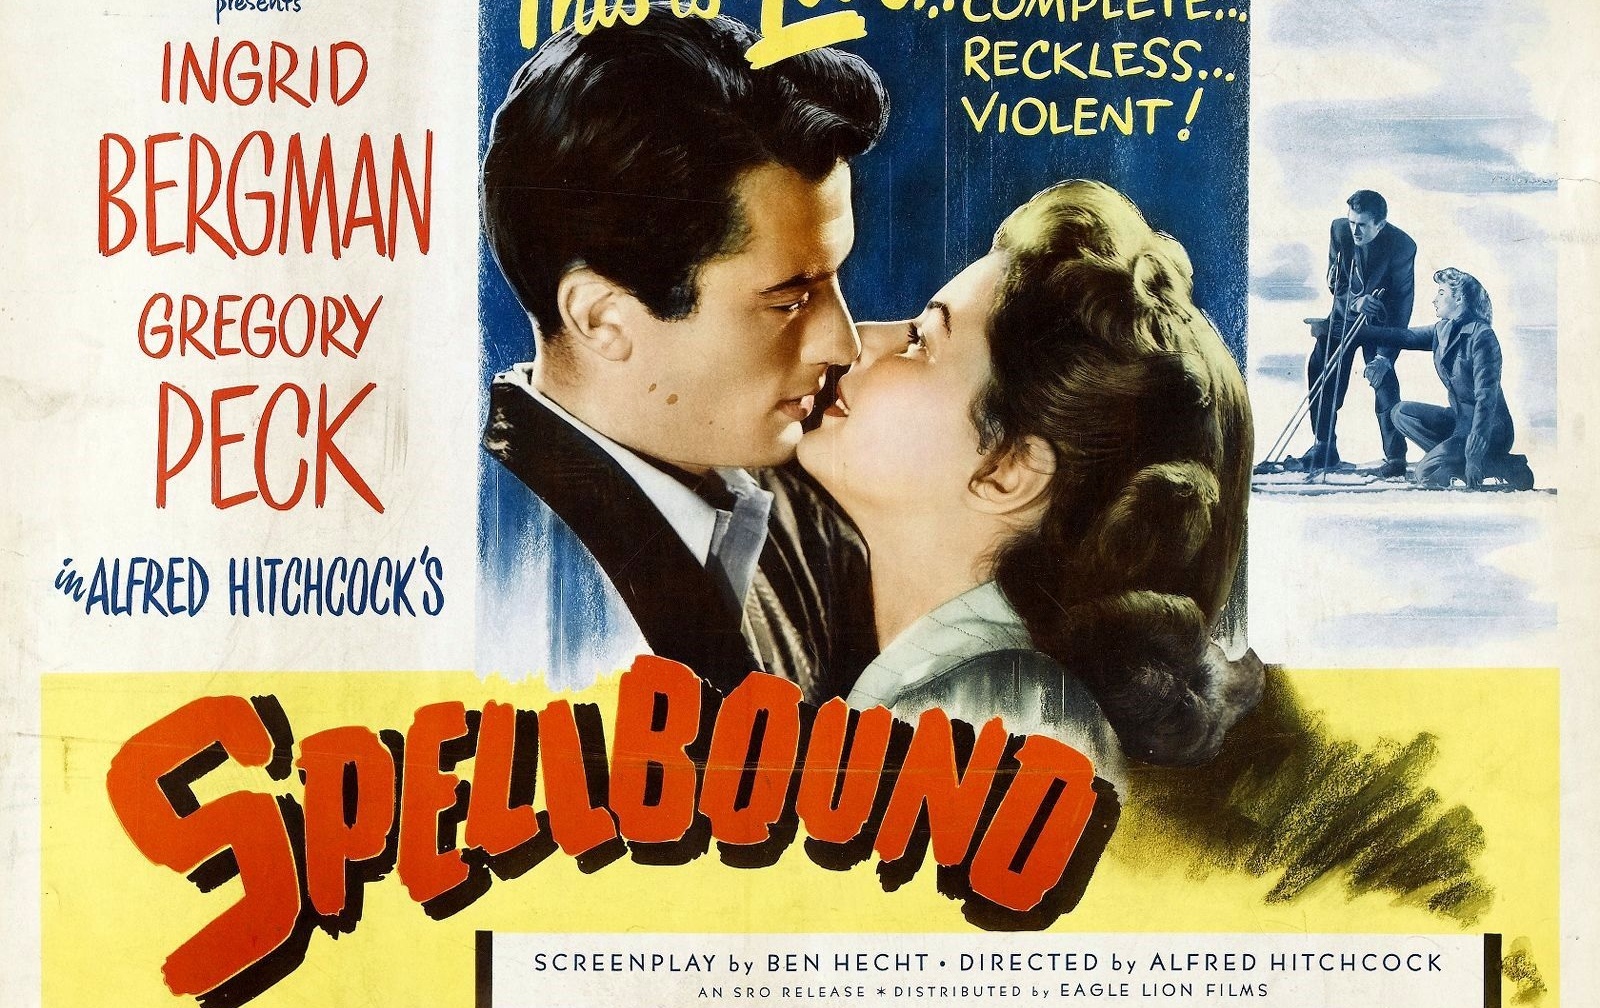 47-facts-about-the-movie-spellbound